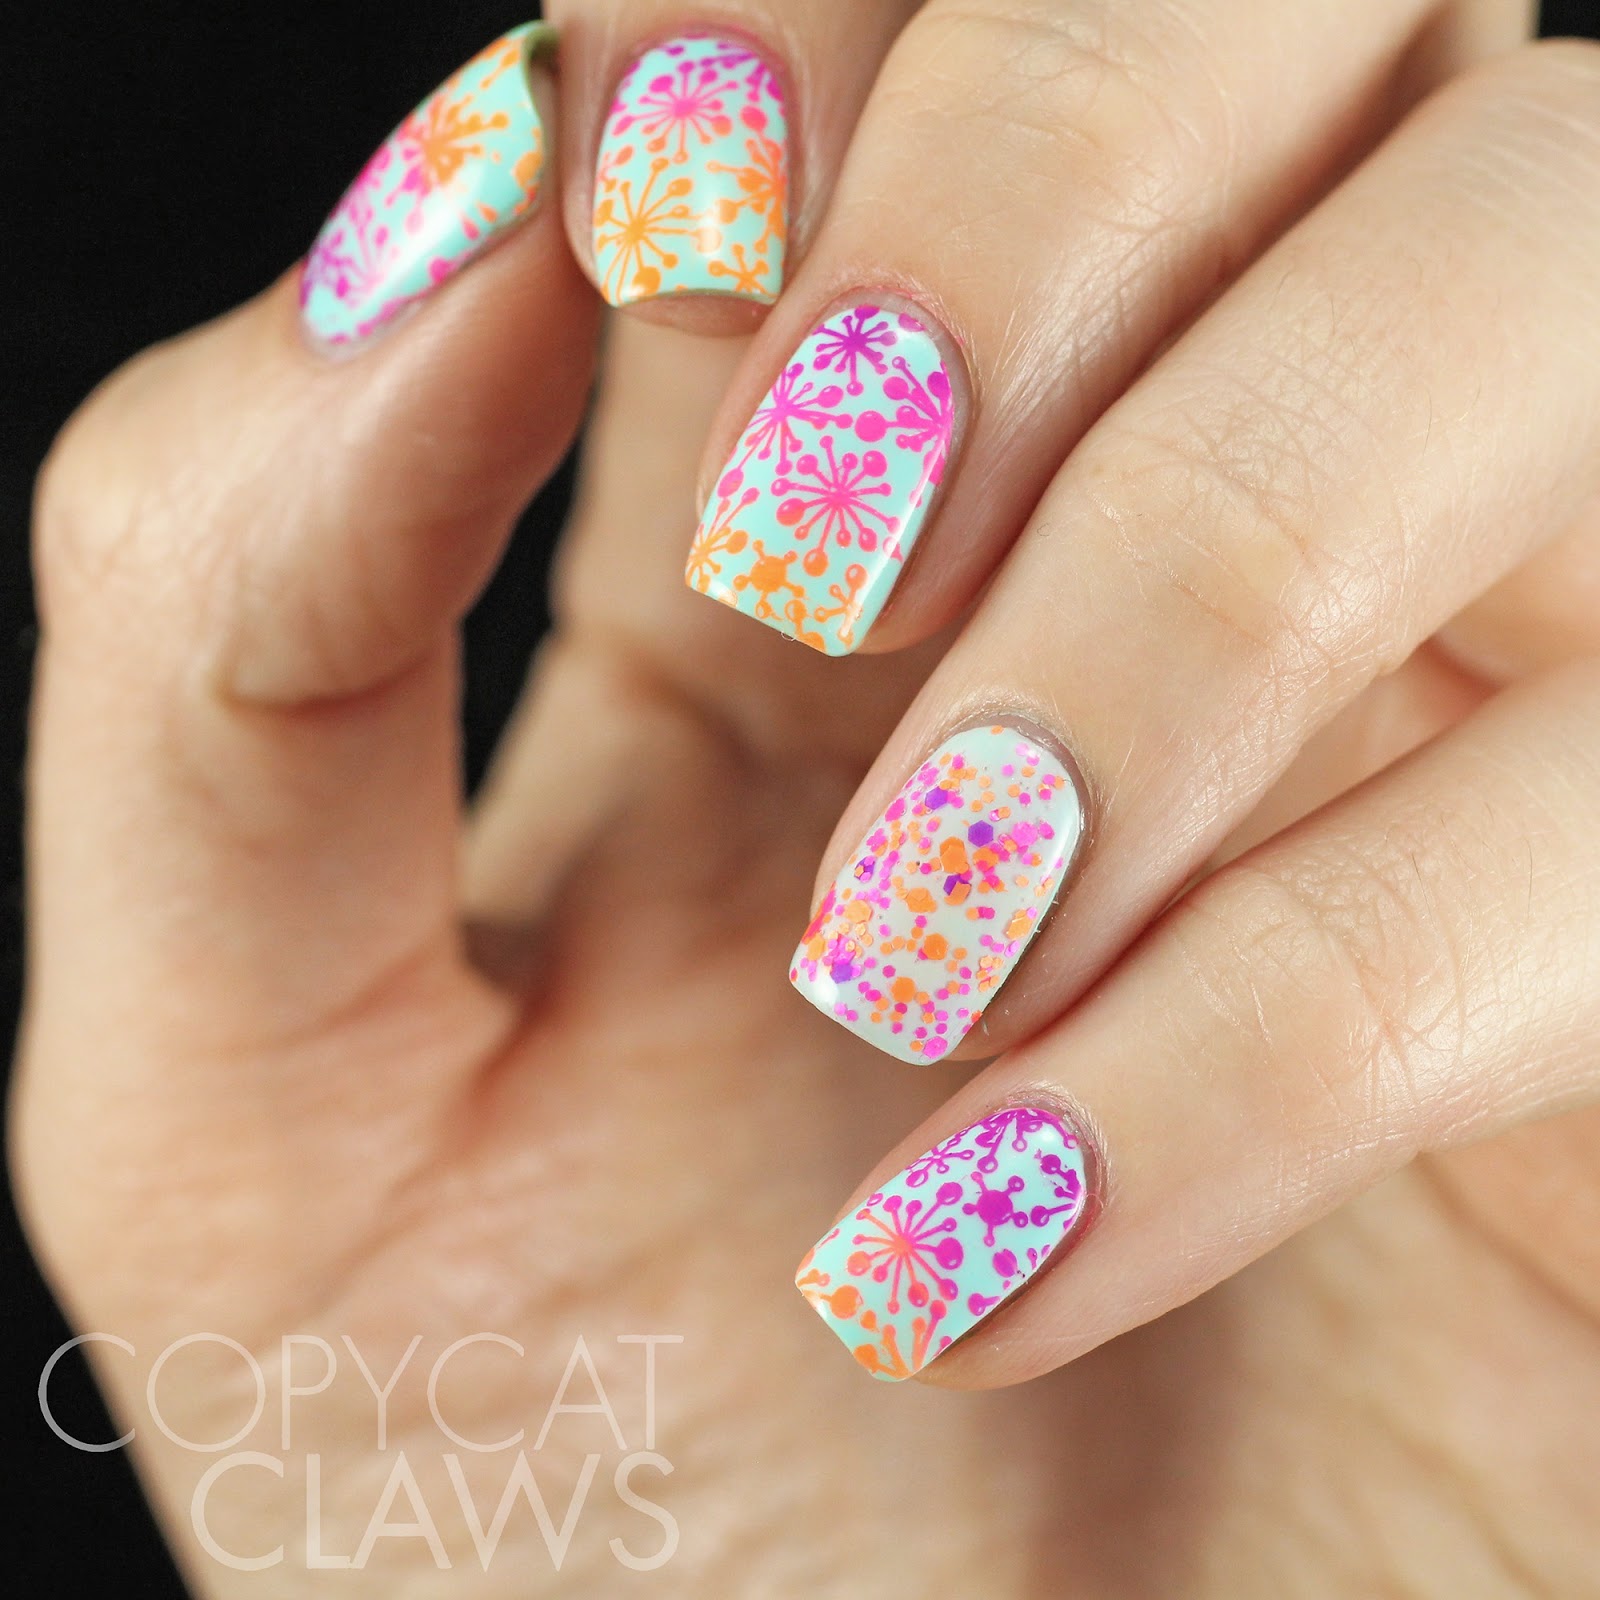 Copycat Claws: Sunday Stamping - Color Crash, Pastels and Neons